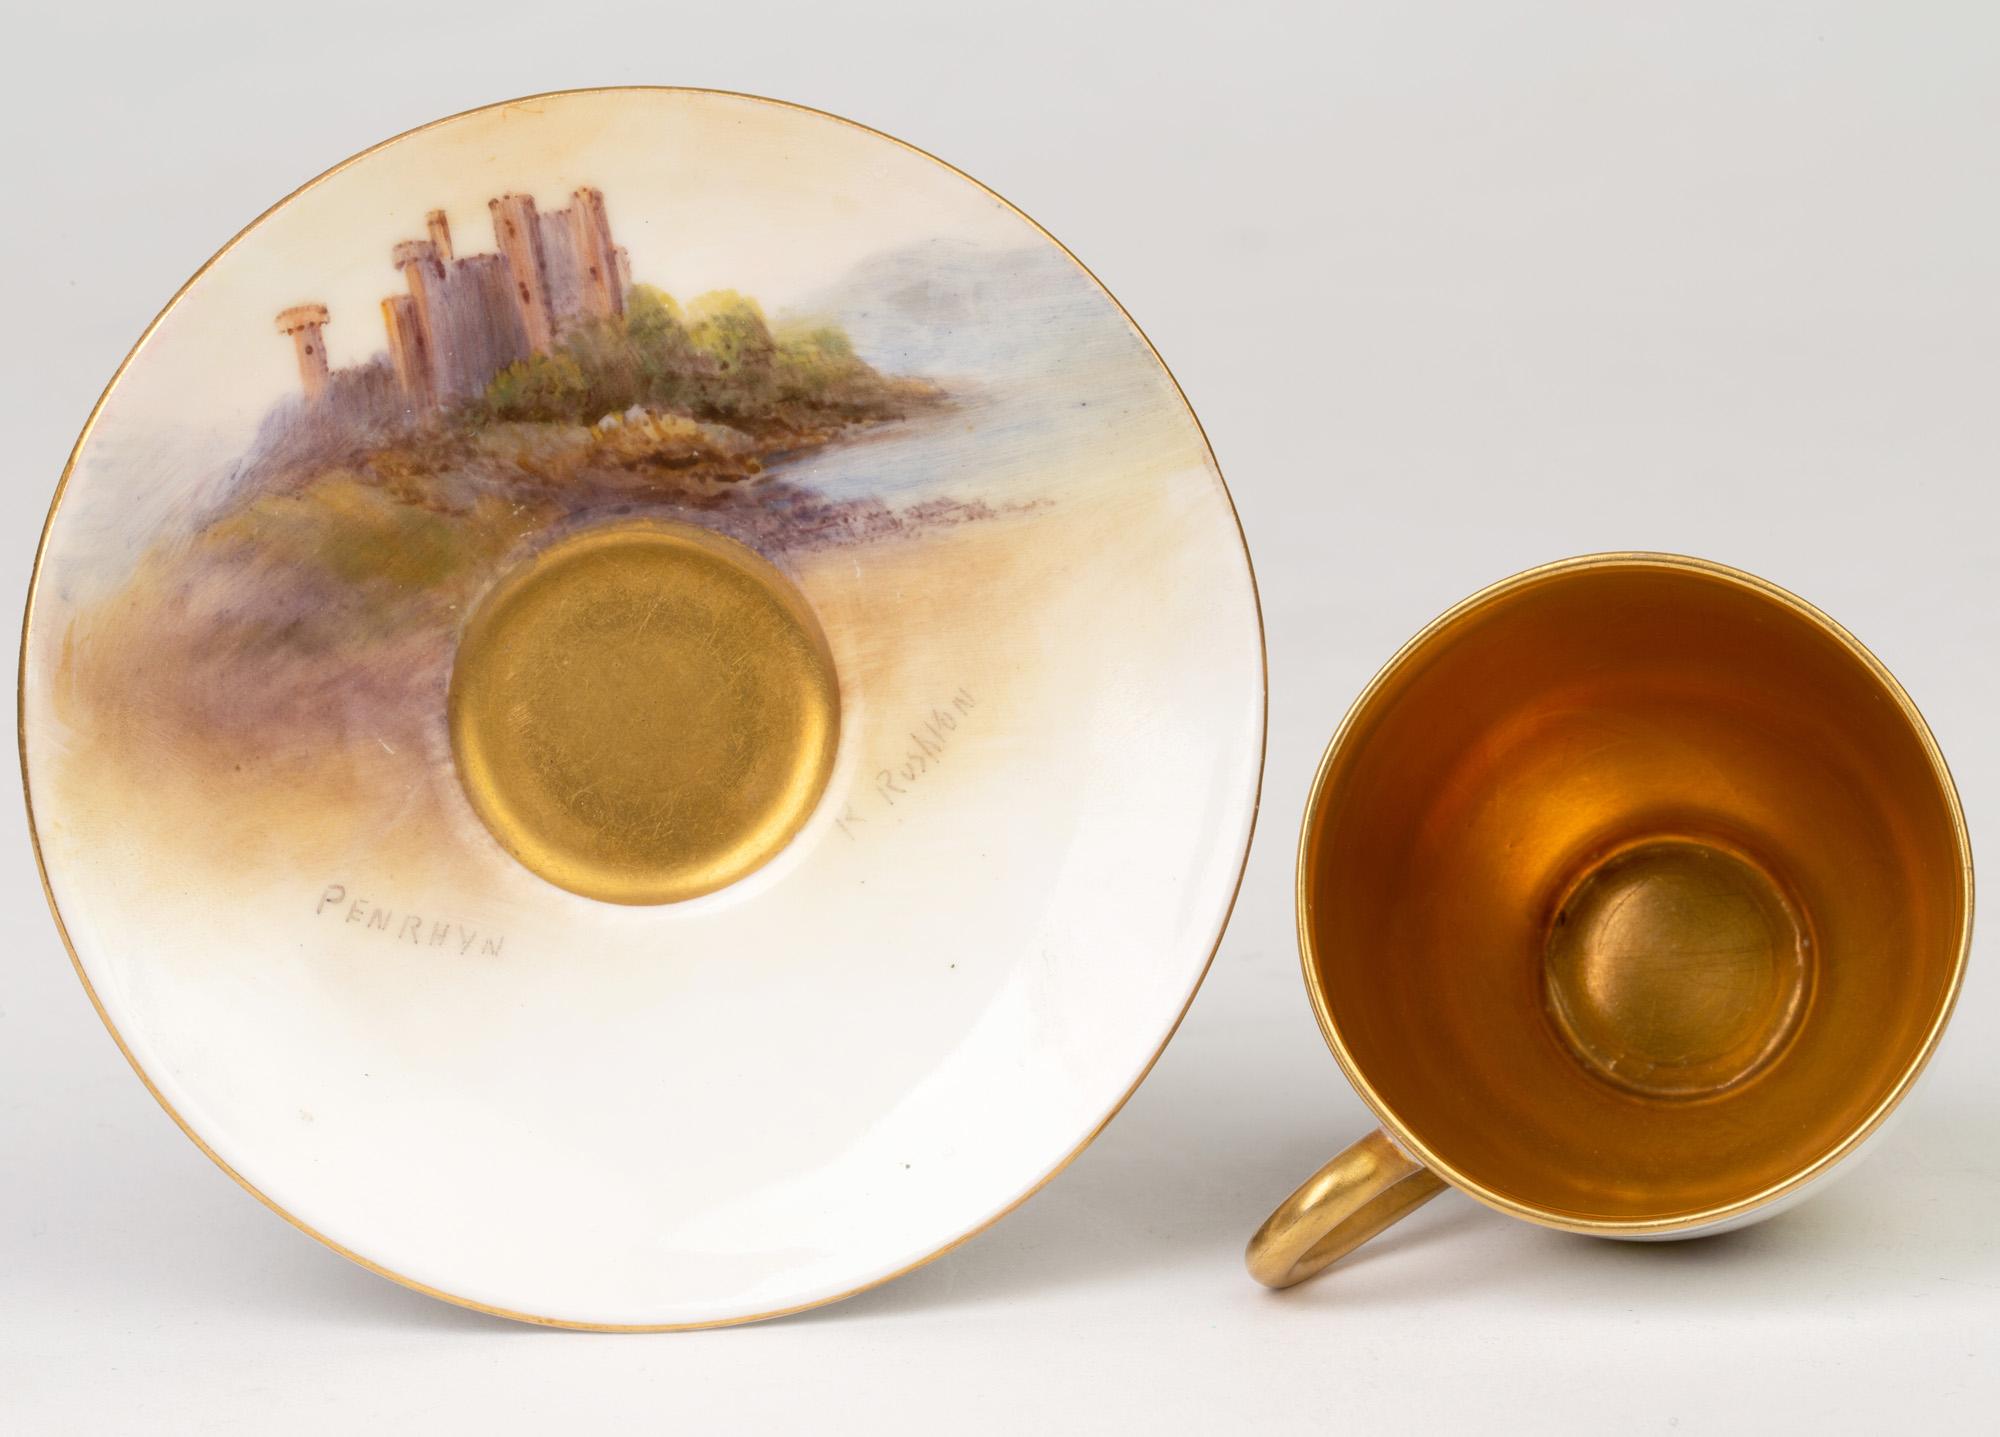 royal worcester coffee cups and saucers